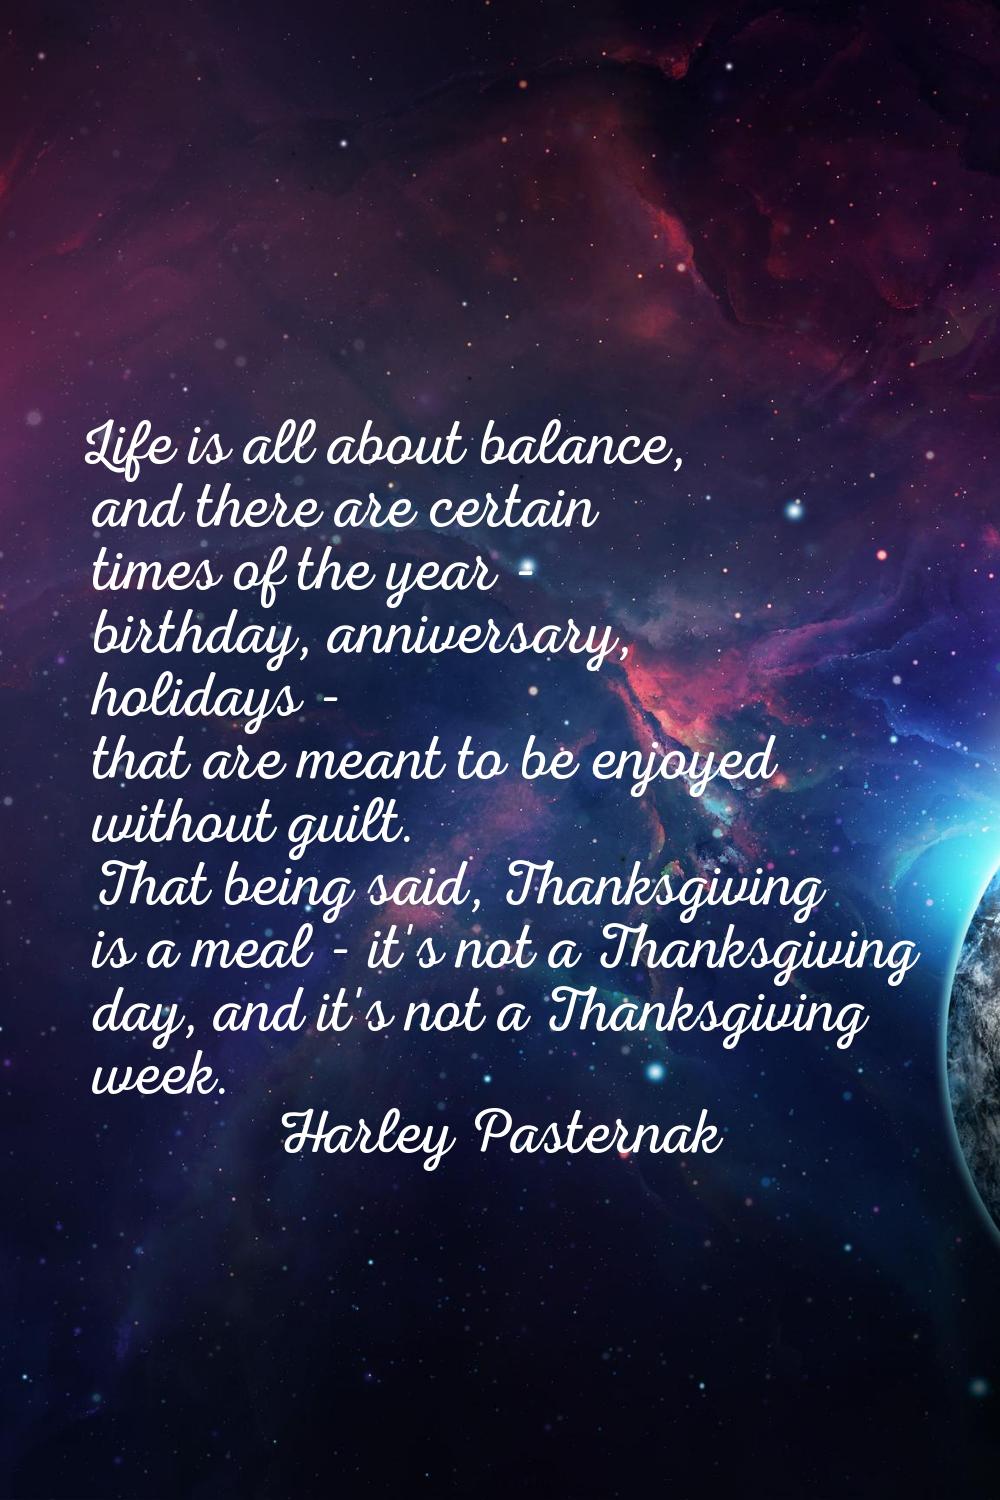 Life is all about balance, and there are certain times of the year - birthday, anniversary, holiday